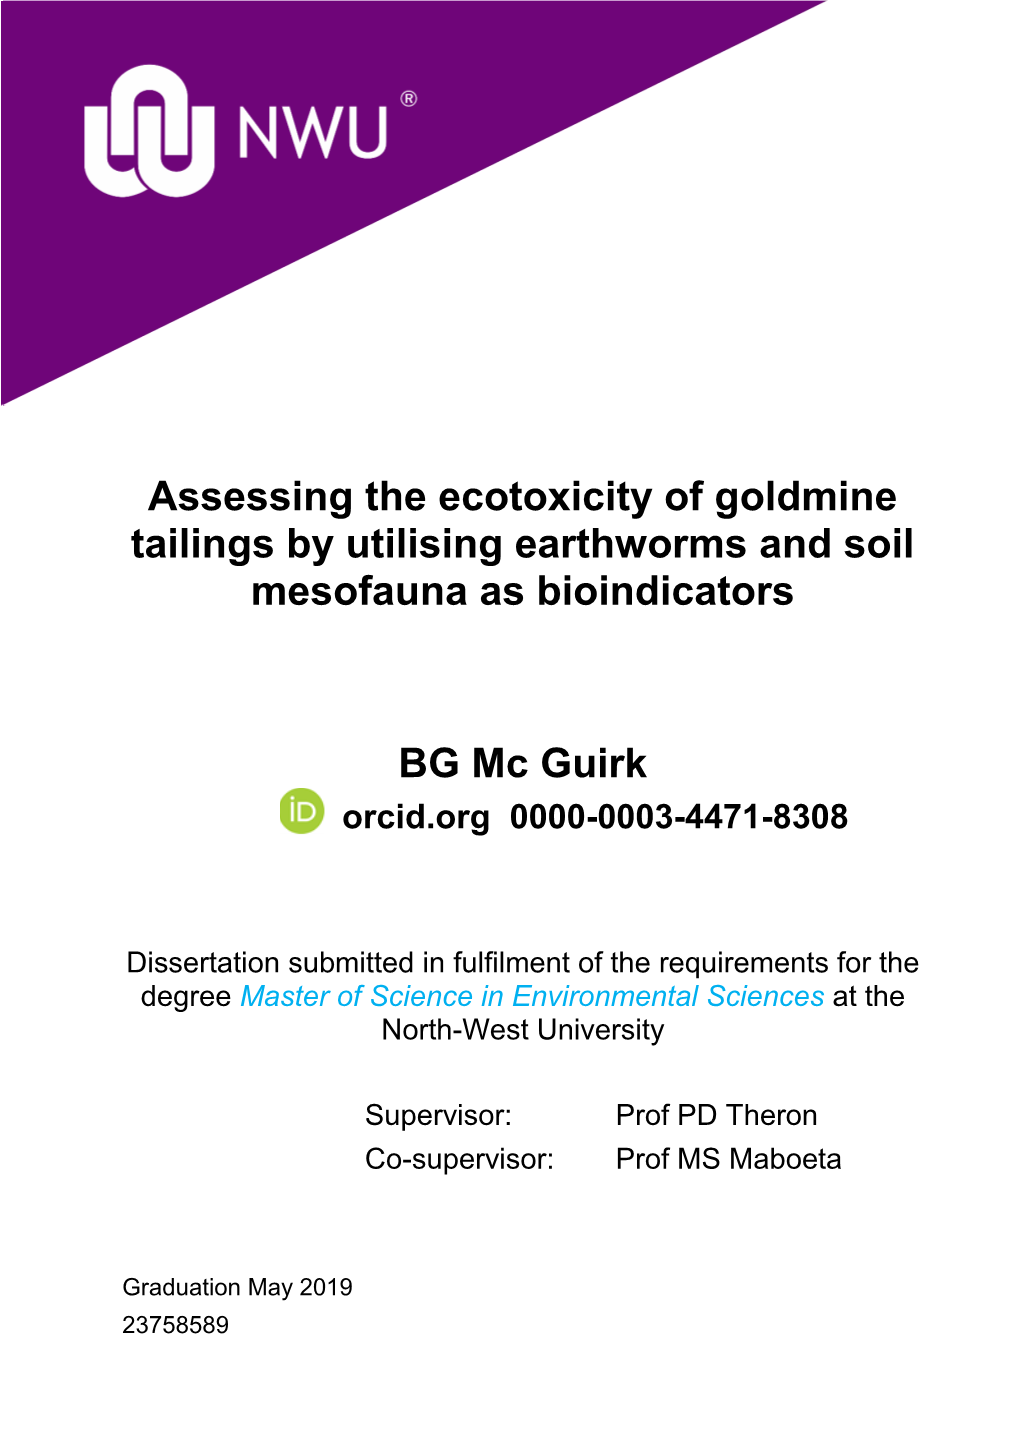 Assessing the Ecotoxicity of Goldmine Tailings by Utilising Earthworms and Soil Mesofauna As Bioindicators